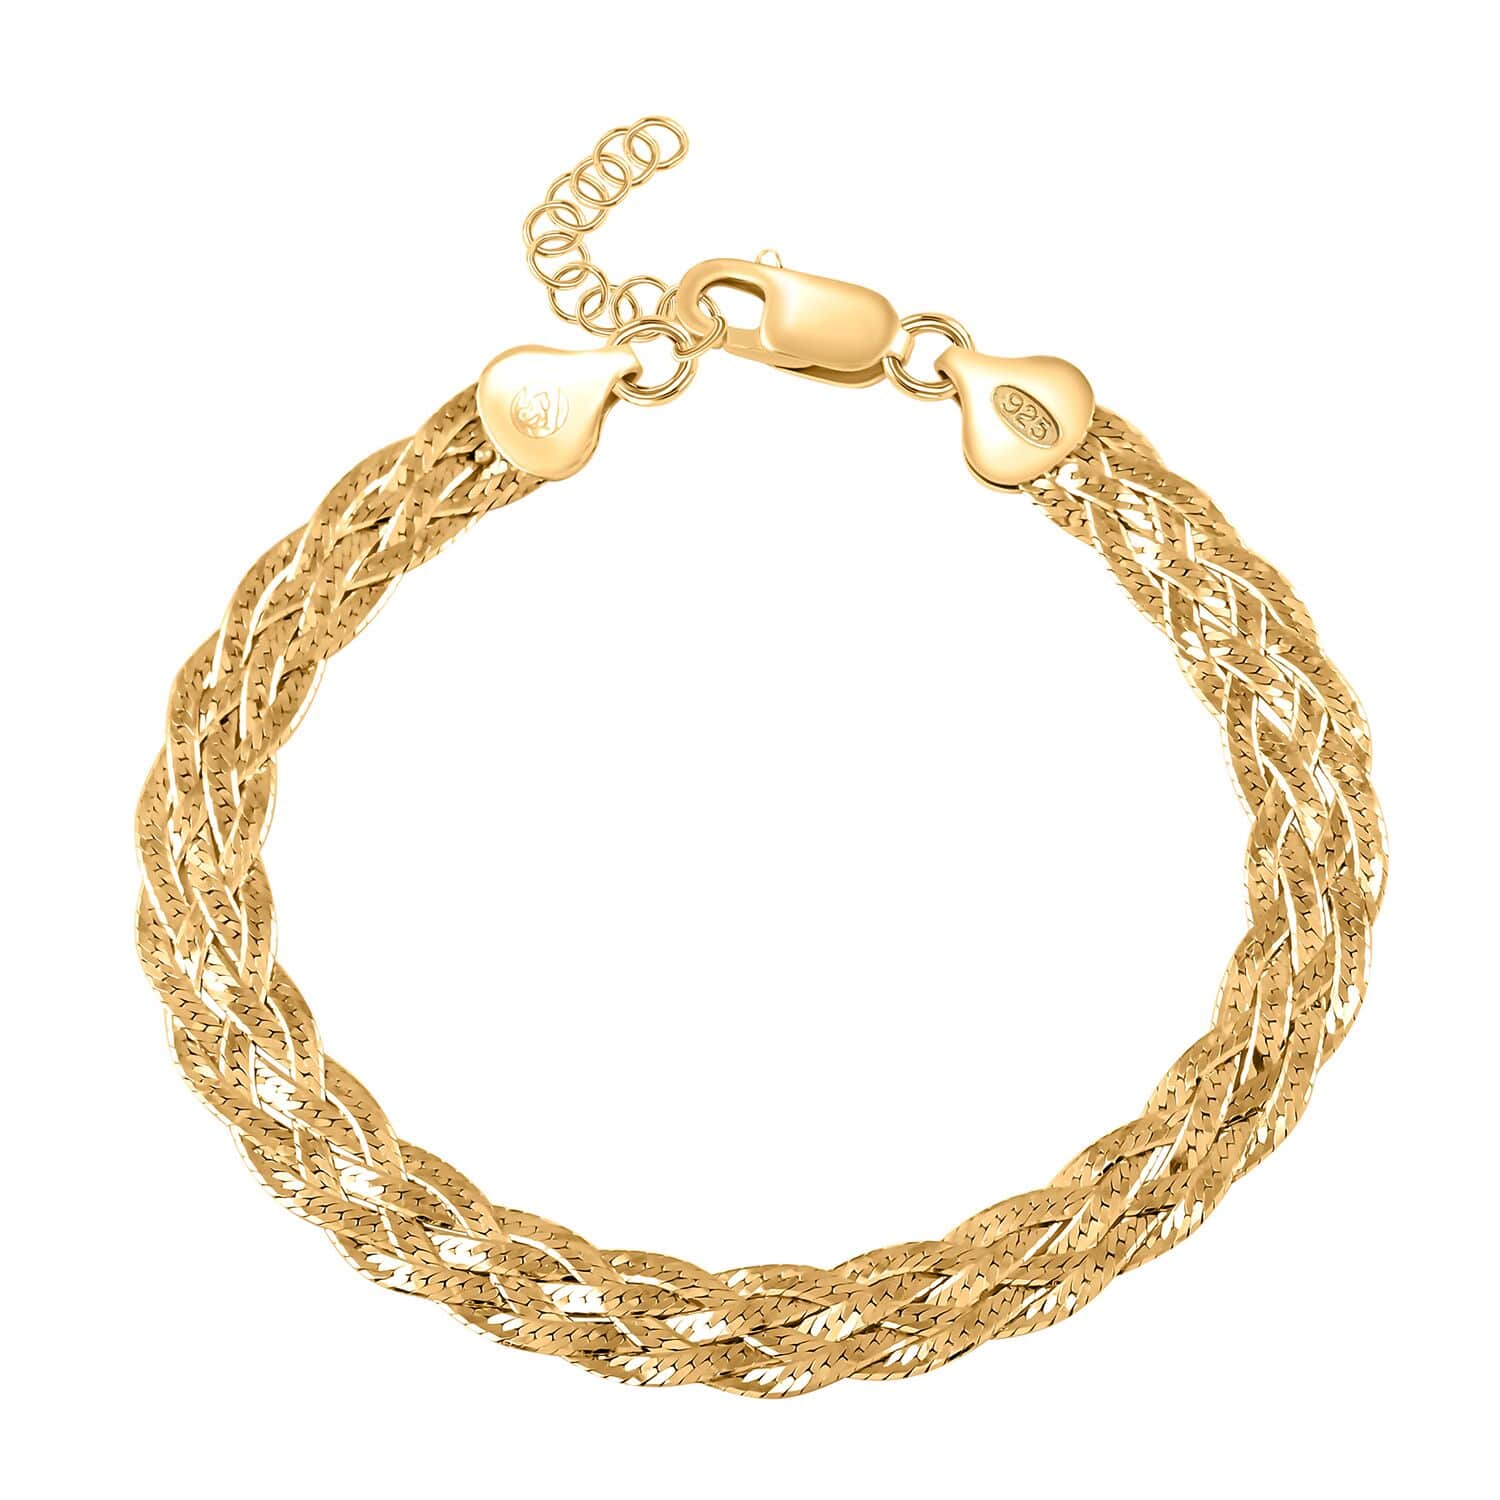 Buy Italian 14K Yellow Gold Over Sterling Silver 5 Lines Braided